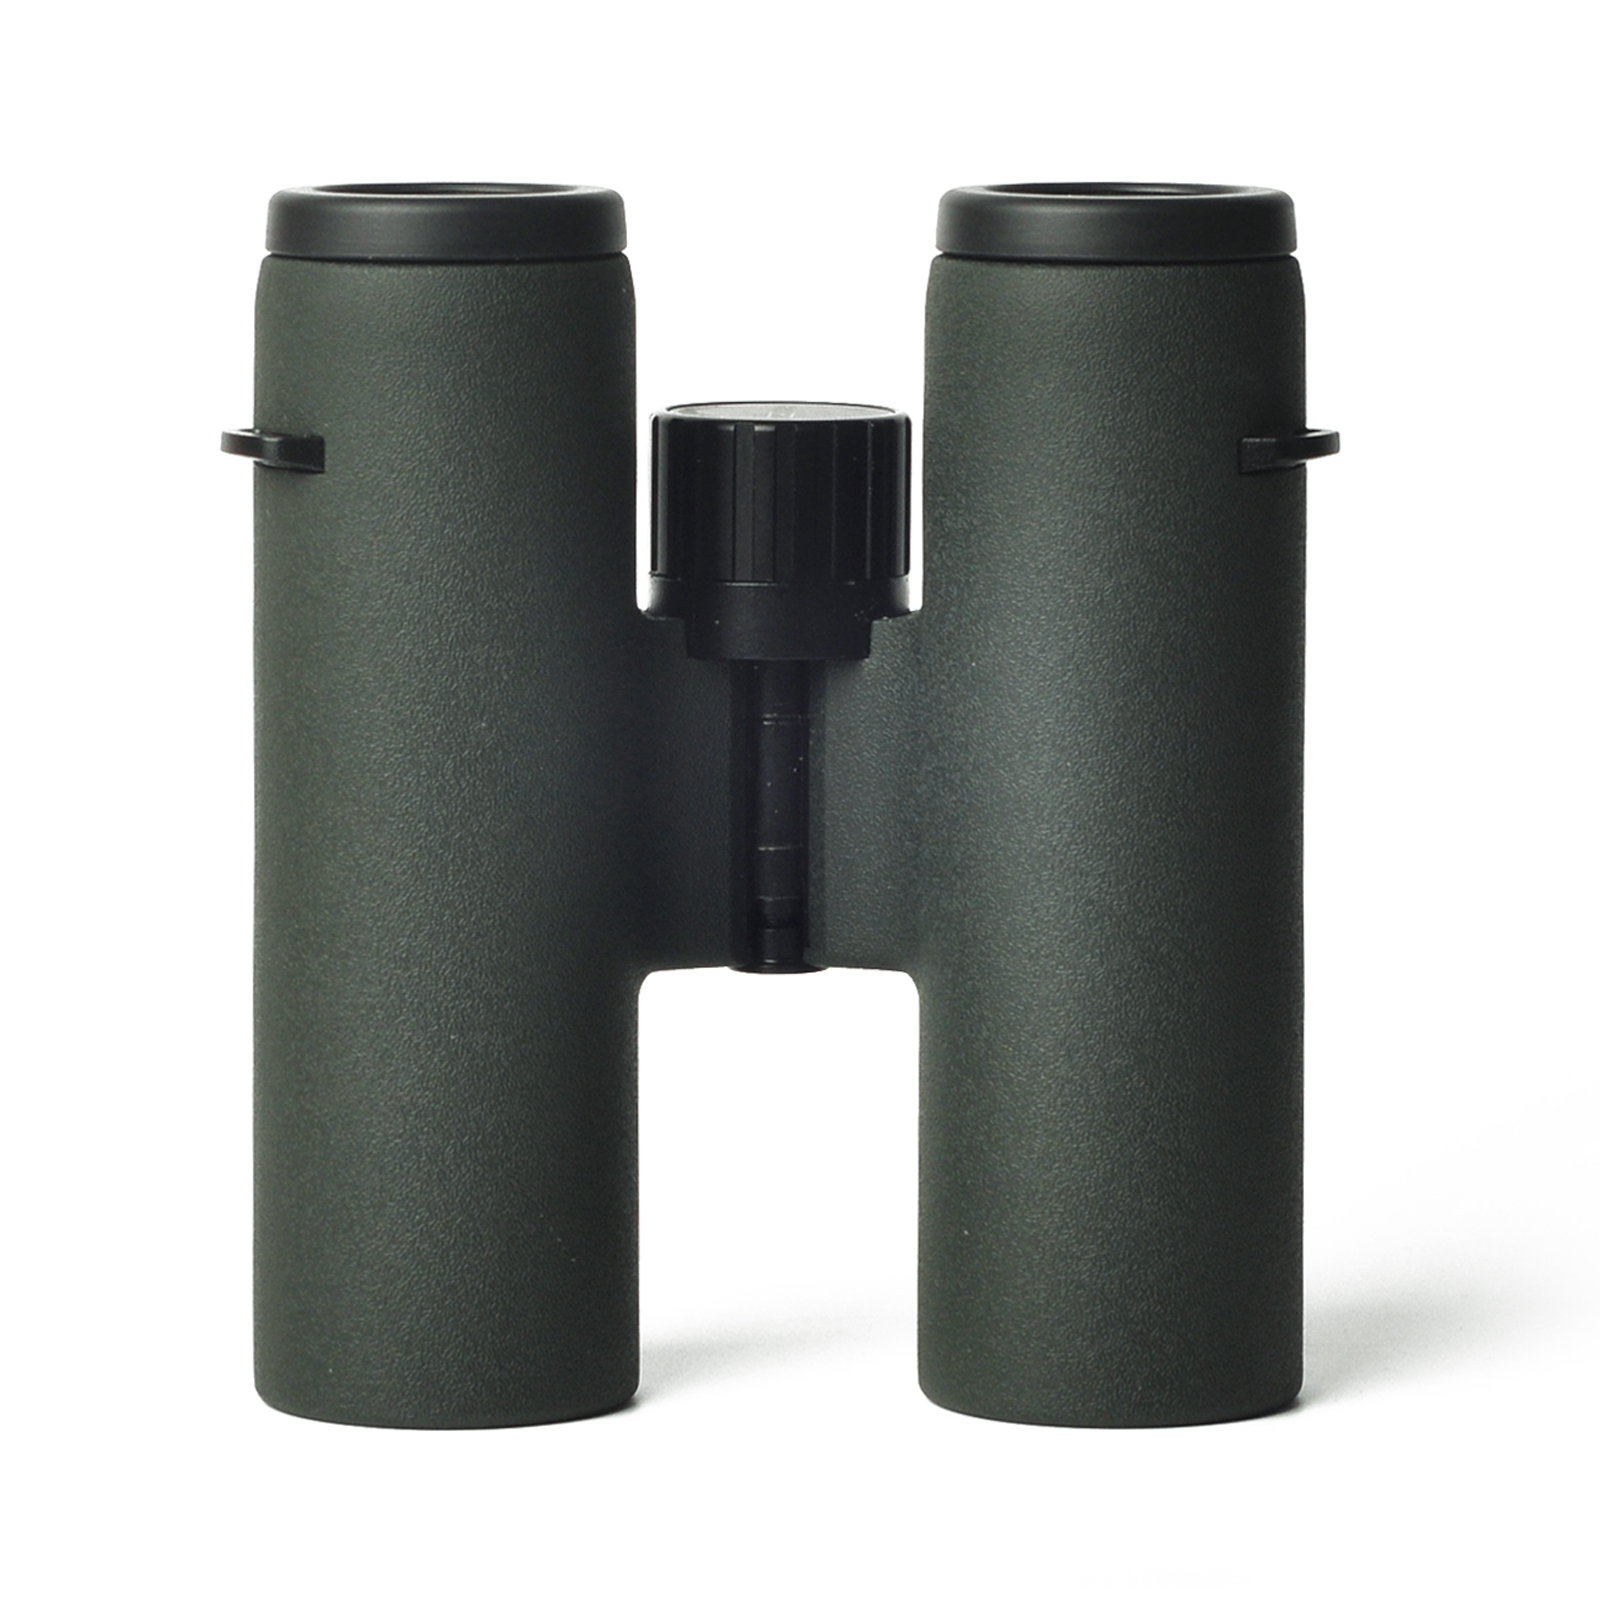 Givite 8X32ED Binoculars - Diamond White Coating with Bak4 Prisms-Waterproof Fogproof Rubber Armored for Bird Watching Hunting Outdoor Travel Theater and Concerts                                                                                             